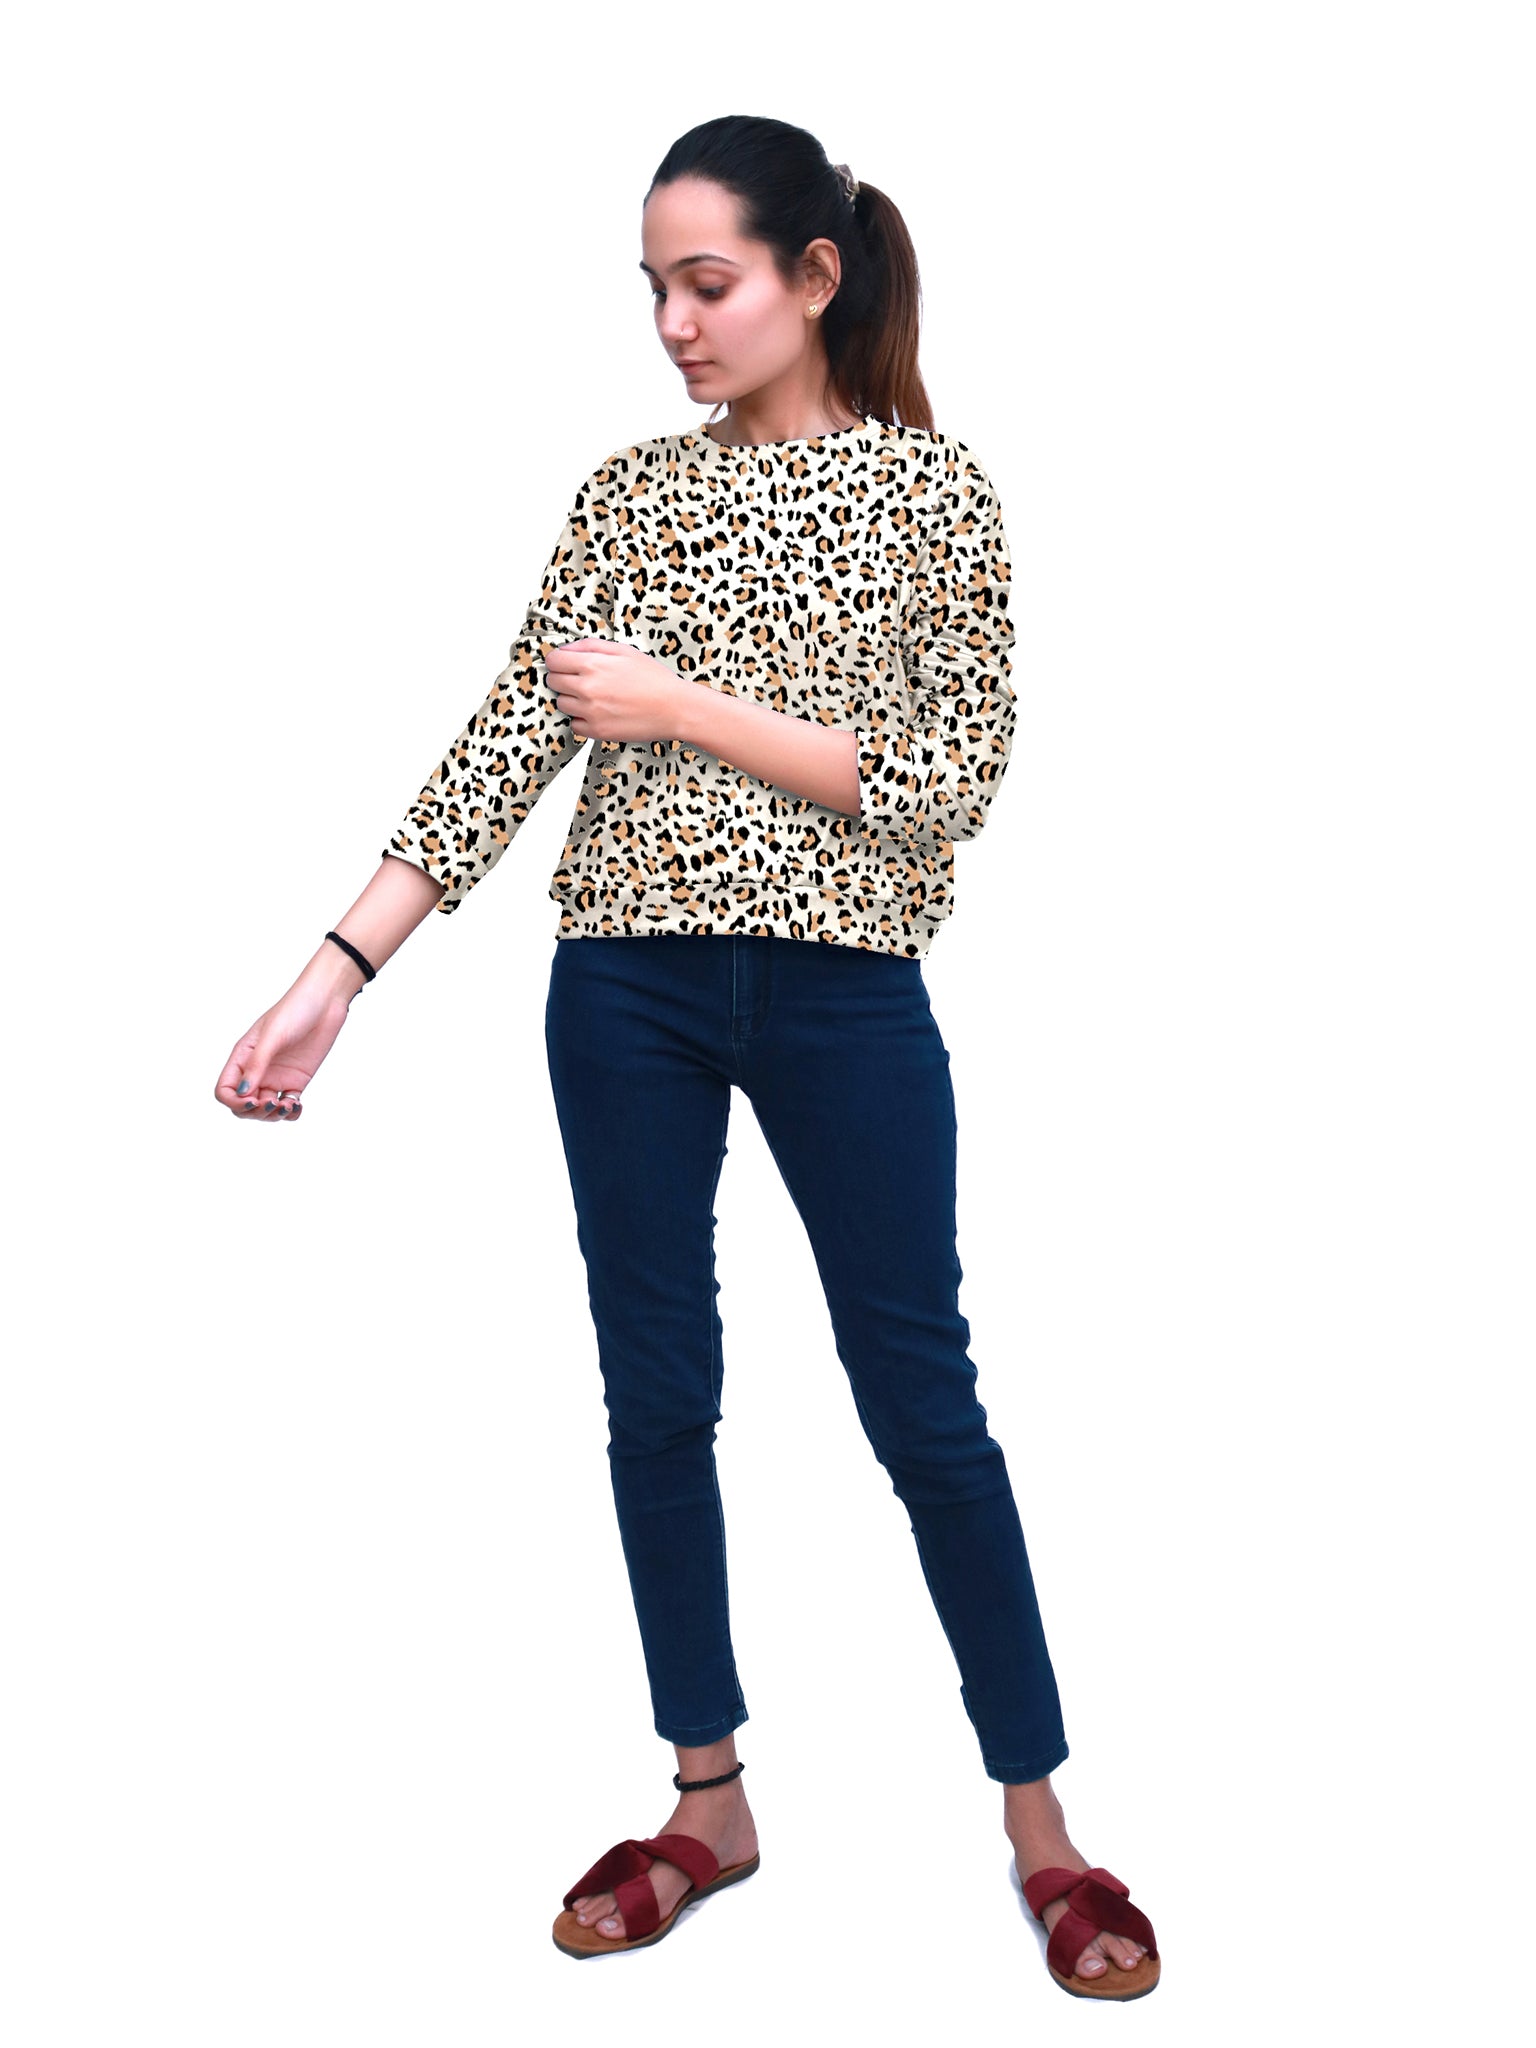 Brownish Off White Leopard Skin Printed Top